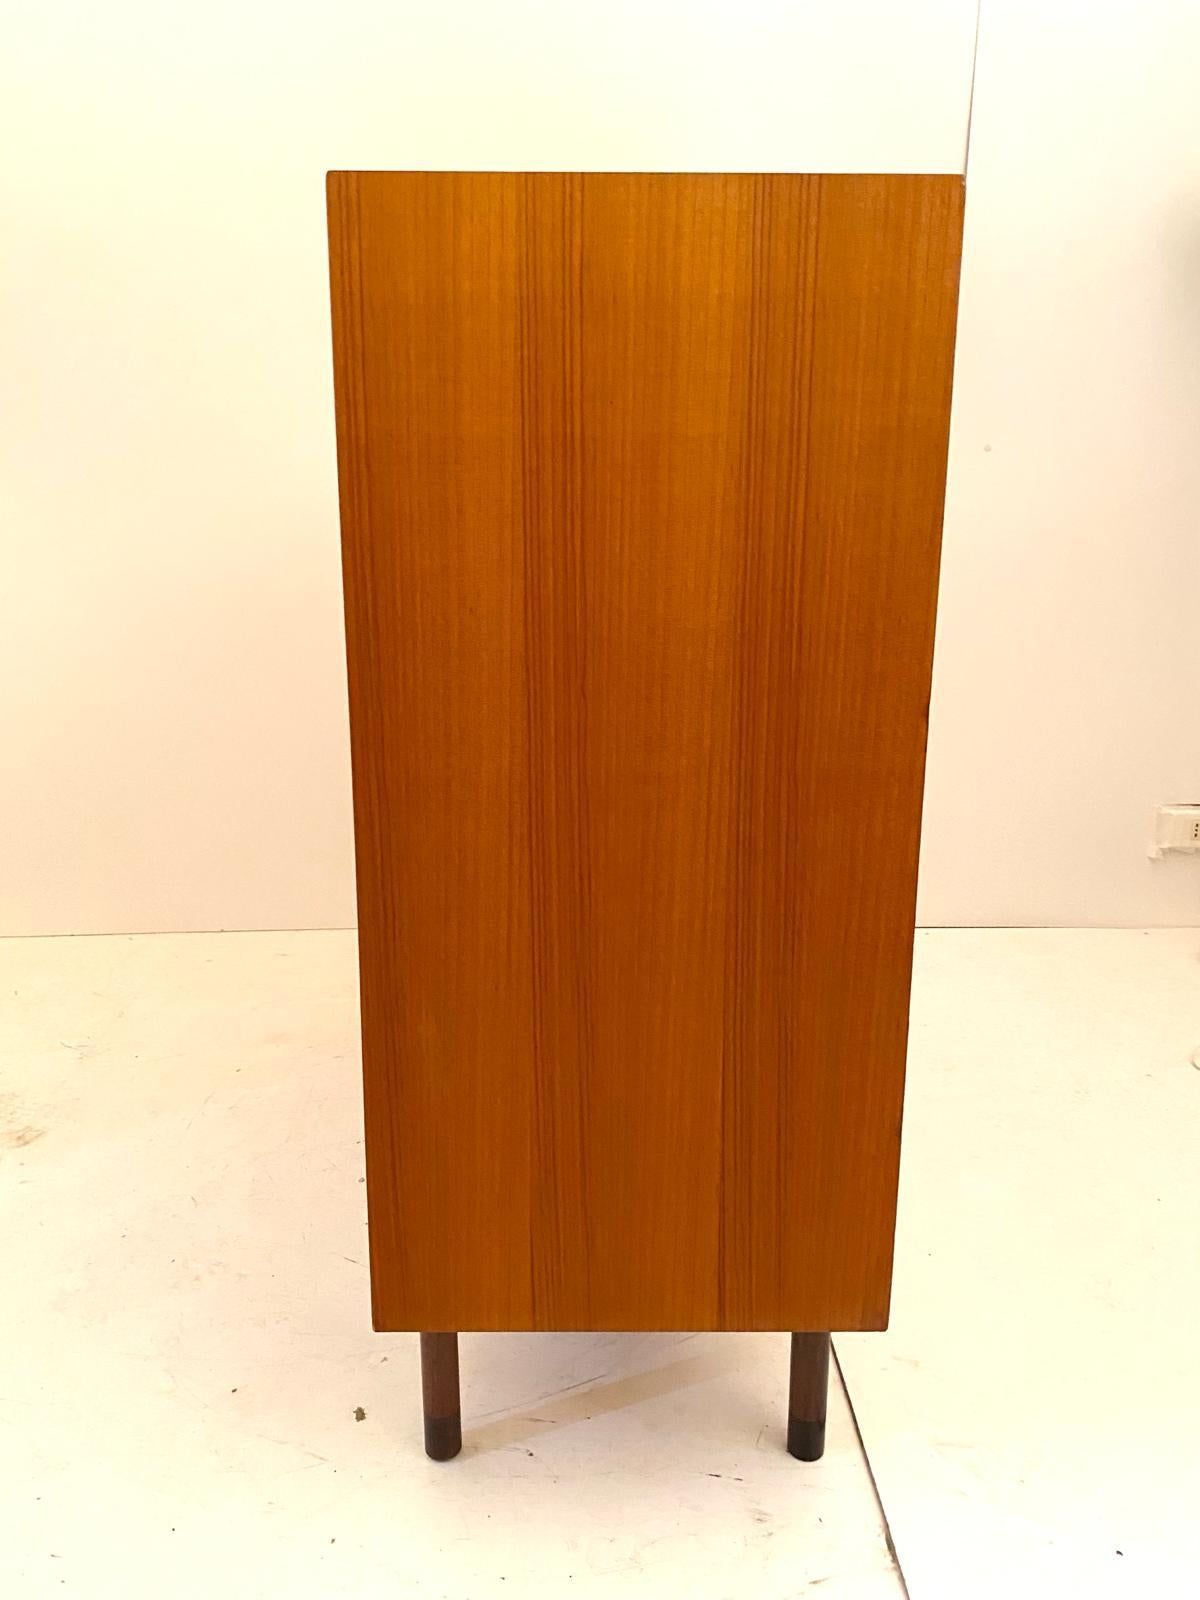 Midcentury Modern, Beech wood cabinet, George Coslin for FARAM, Italy 1960 's For Sale 8